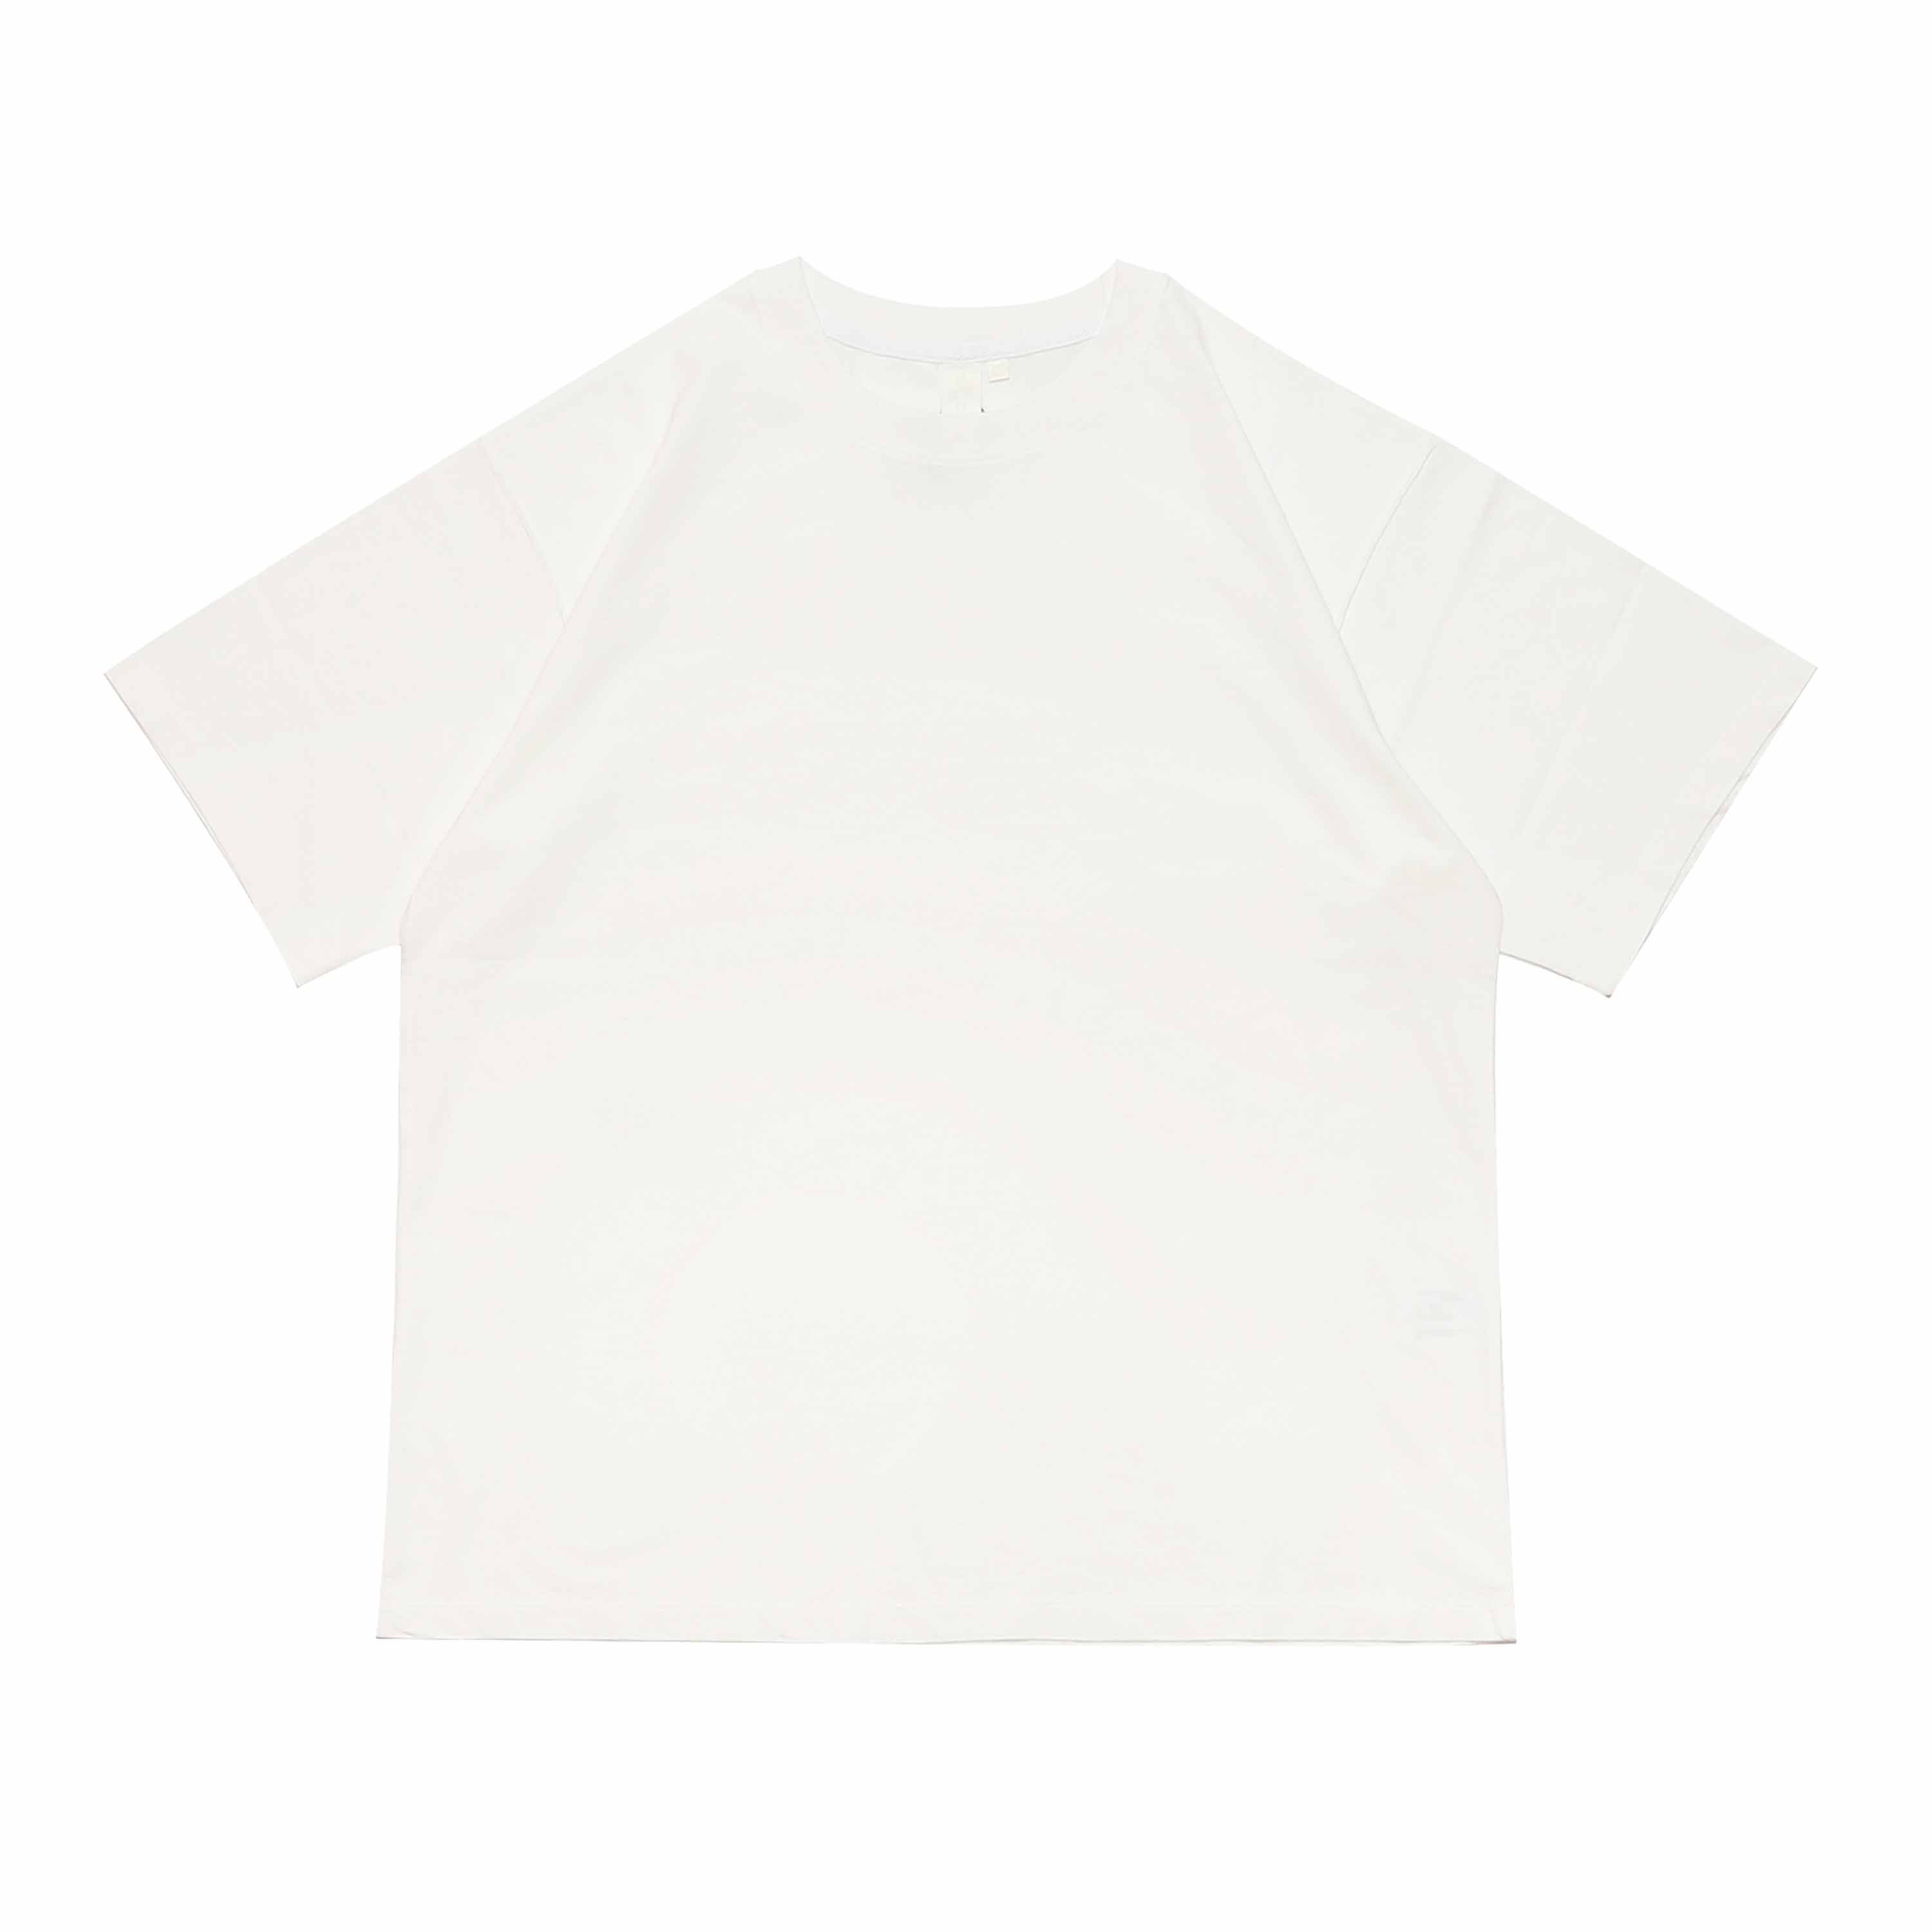 SOLID T-SHIRT - WHITE